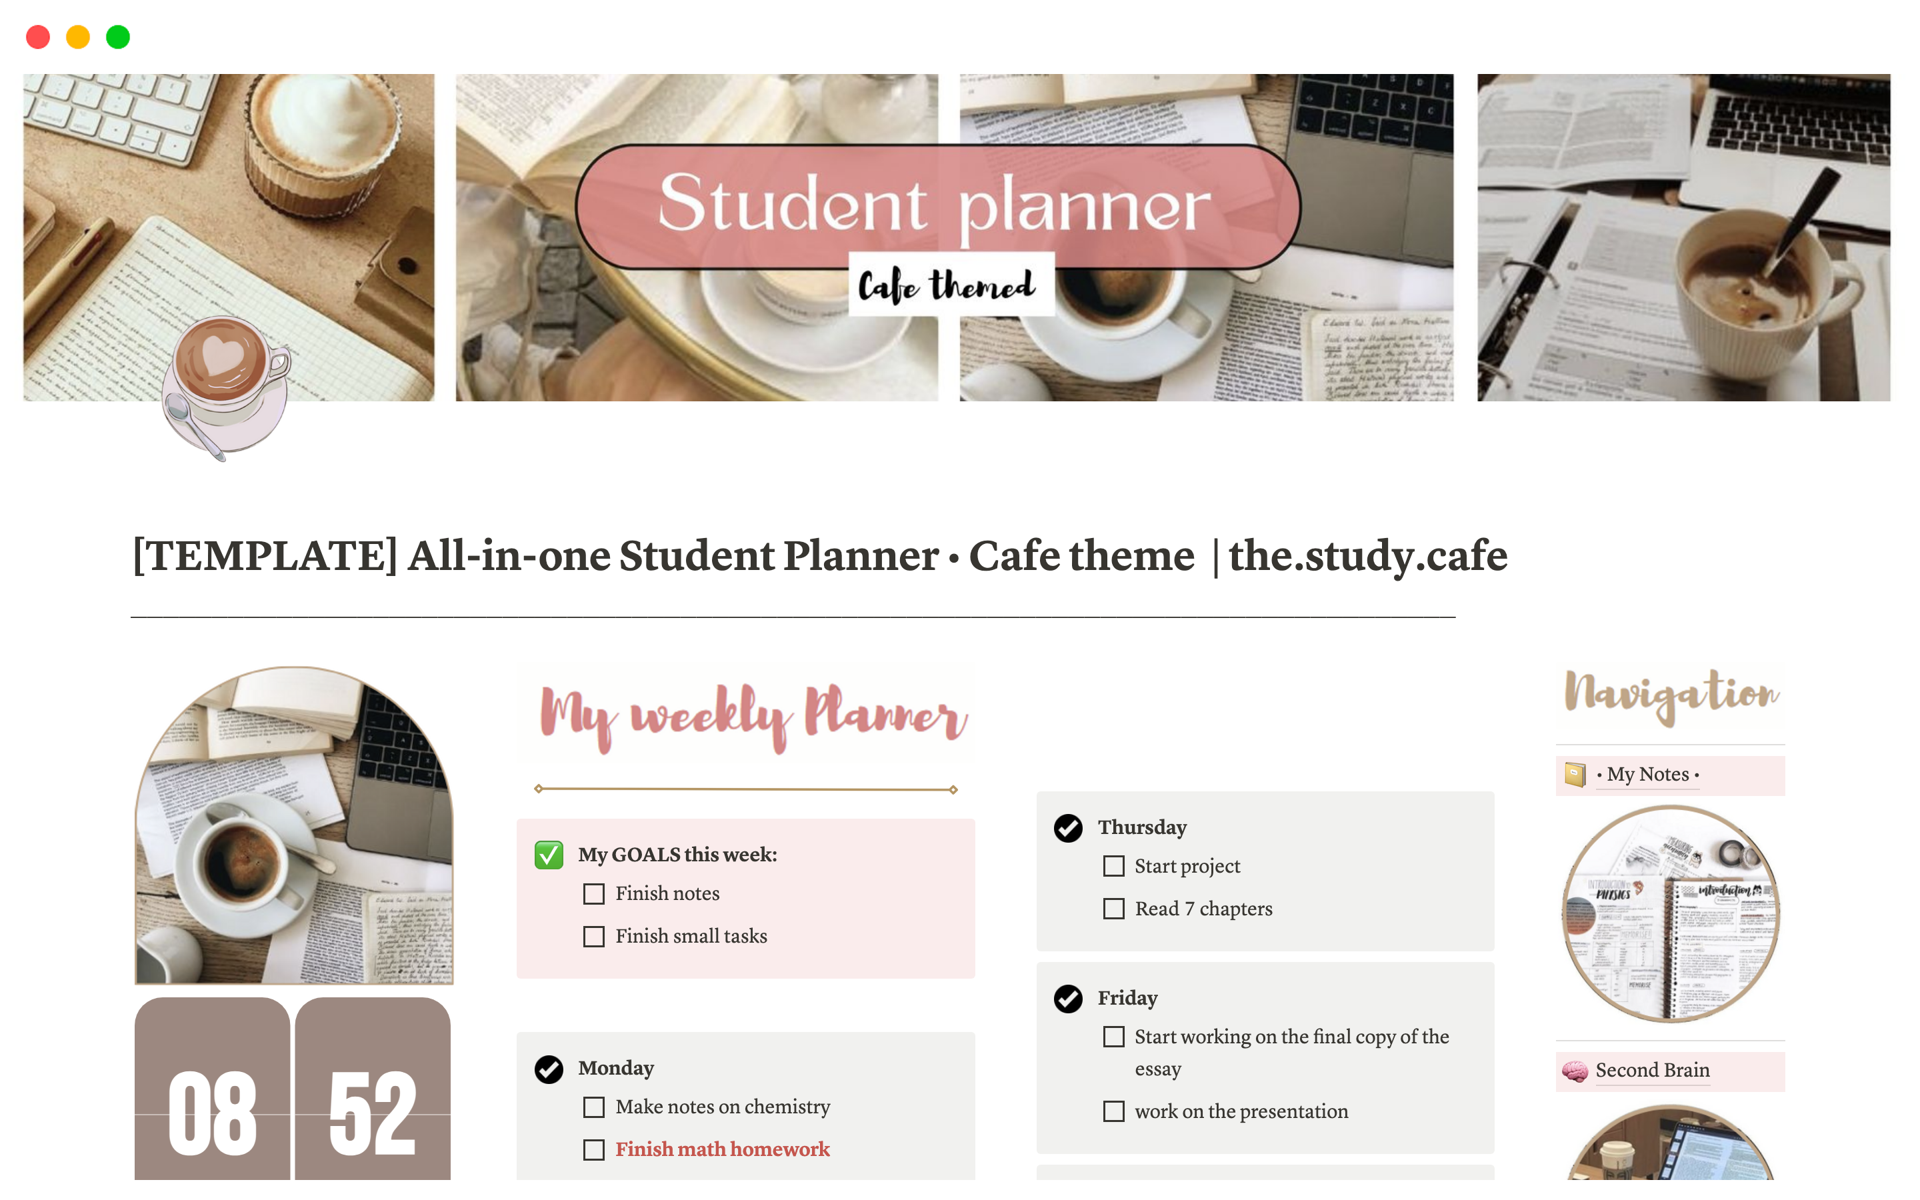 Mallin esikatselu nimelle All-in-one Student Planner • Cafe theme